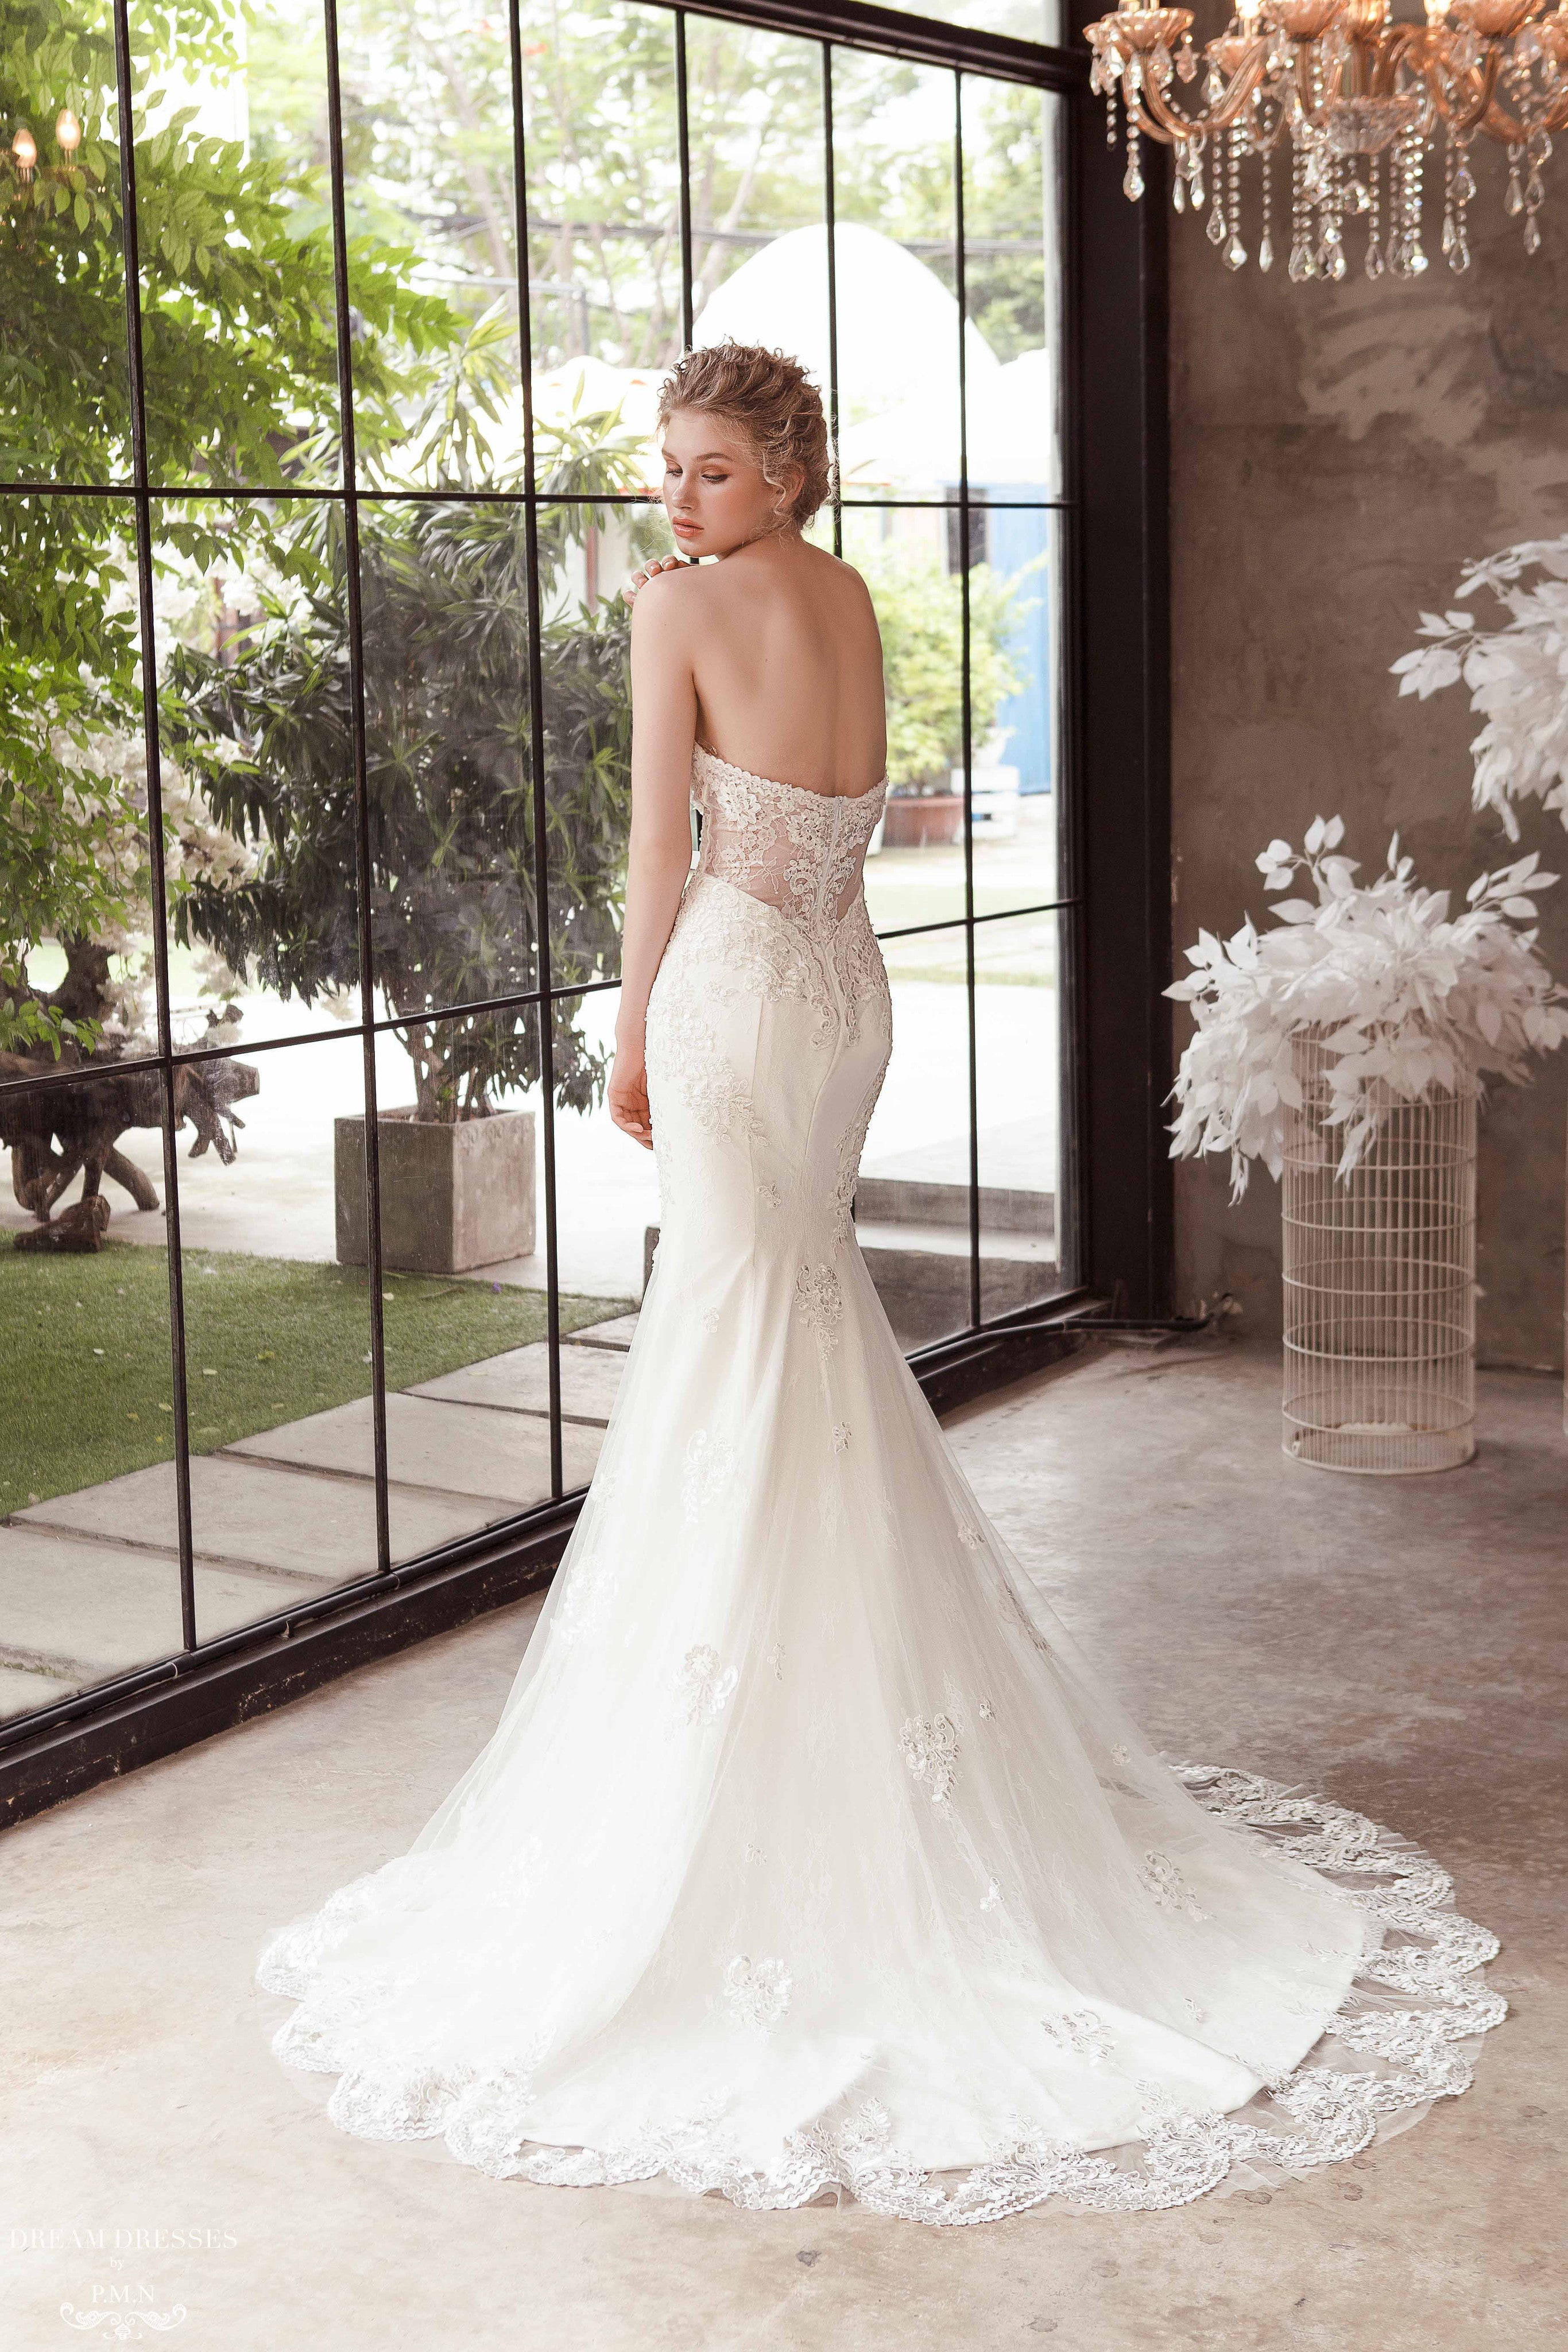 Lace Strapless Mermaid Wedding Dress (#Camille)